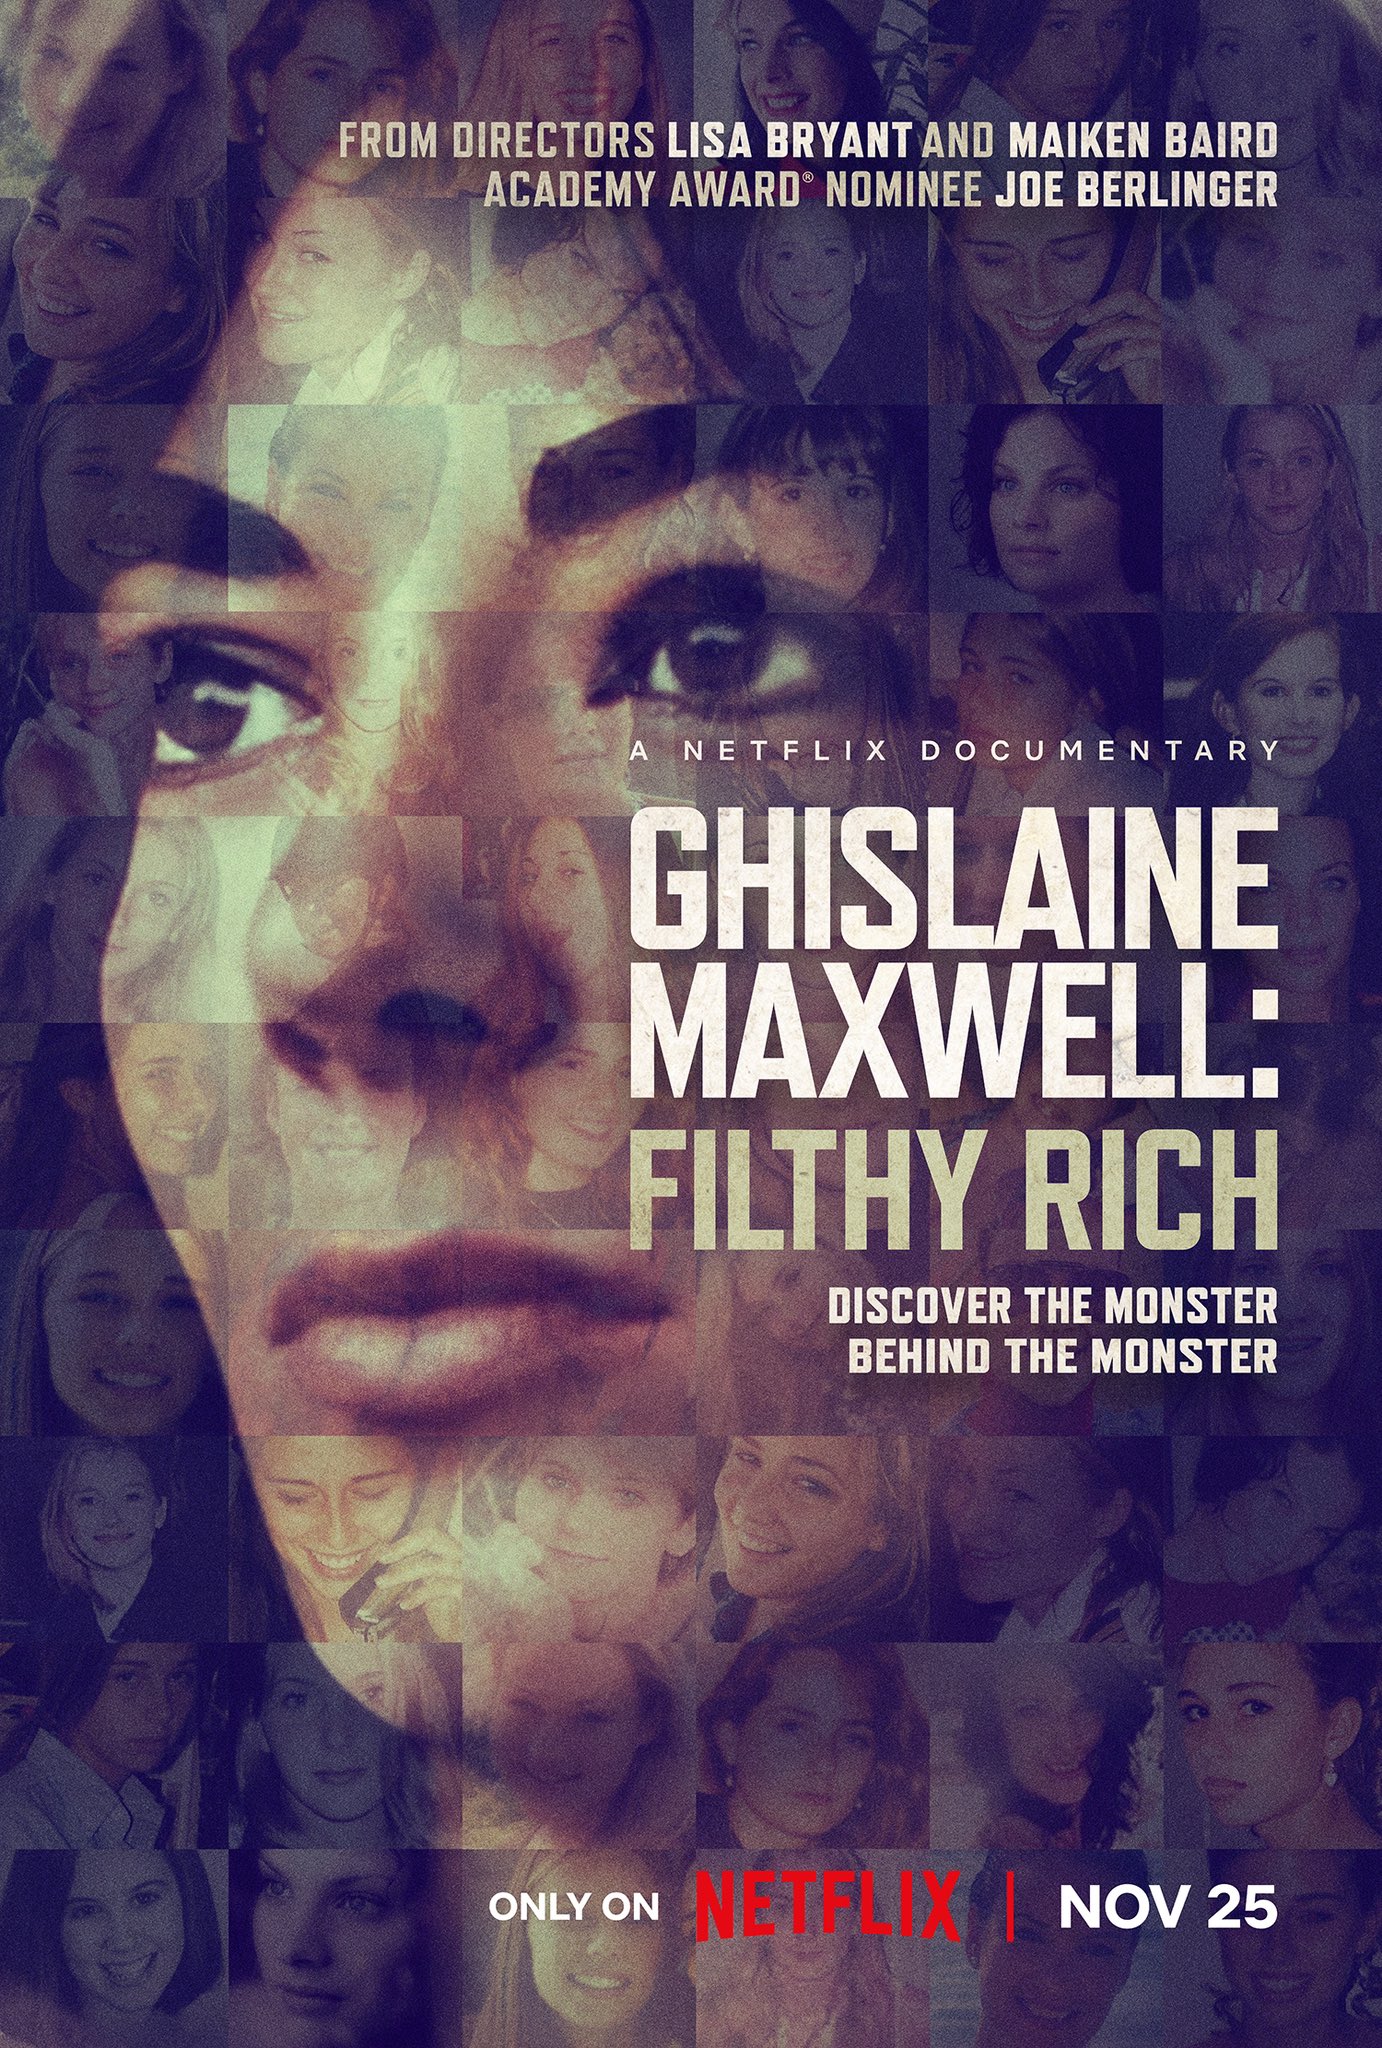 Ghislaine Maxwell Filthy Rich: All you need to know